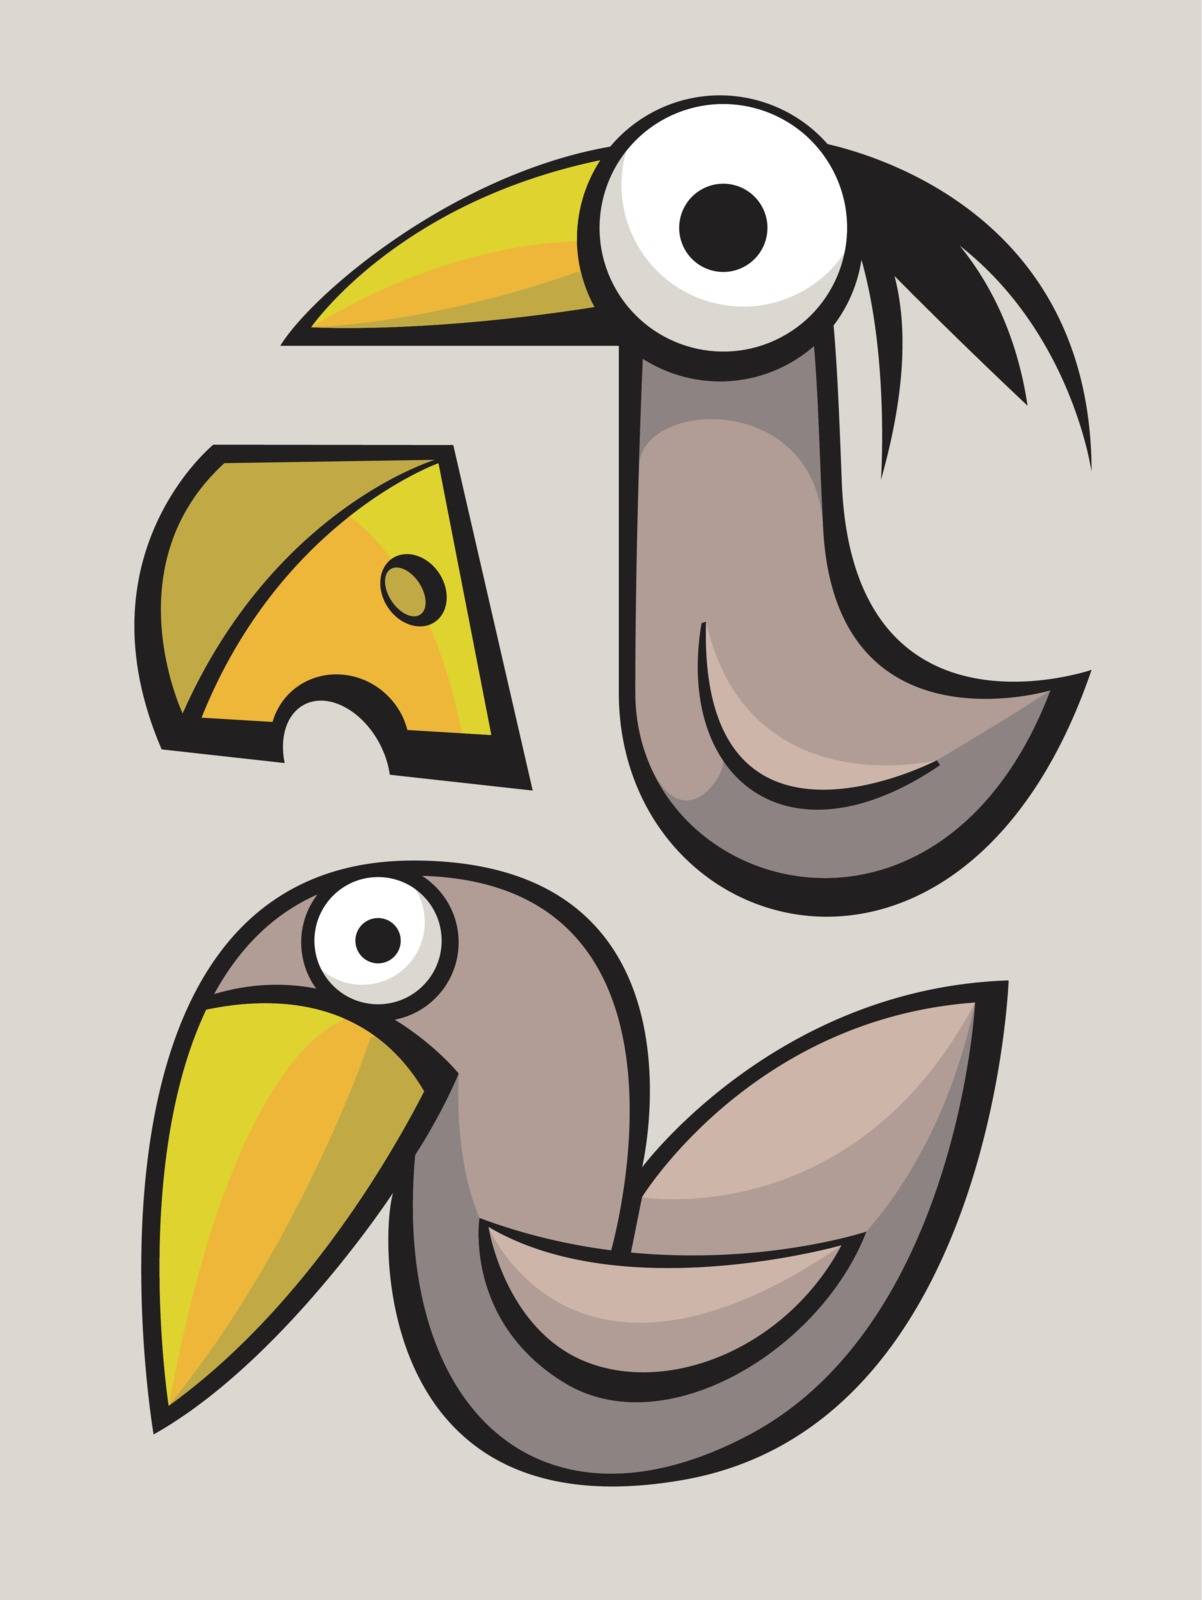 Funny cute stylized birds playing and flying